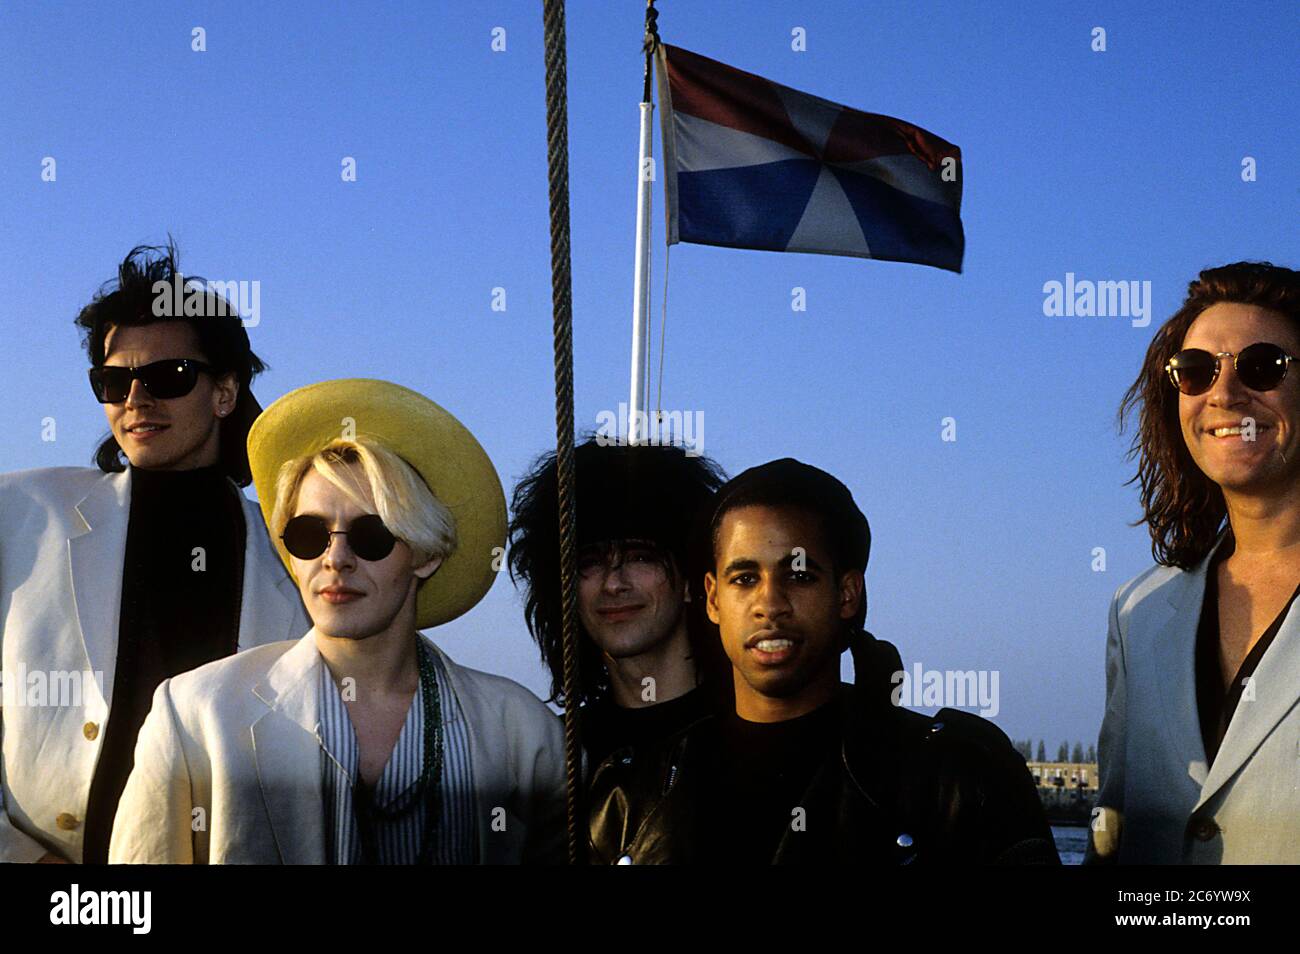 John Taylor, Nick Rhodes, Warren Cuccurullo, Sterling Campbell and Simon Le Bon of Duran Duran at the photocall for the Big Electric Theater tour in Limeharbour on the Isle of Dogs. London, April 13, 1989 | usage worldwide Stock Photo